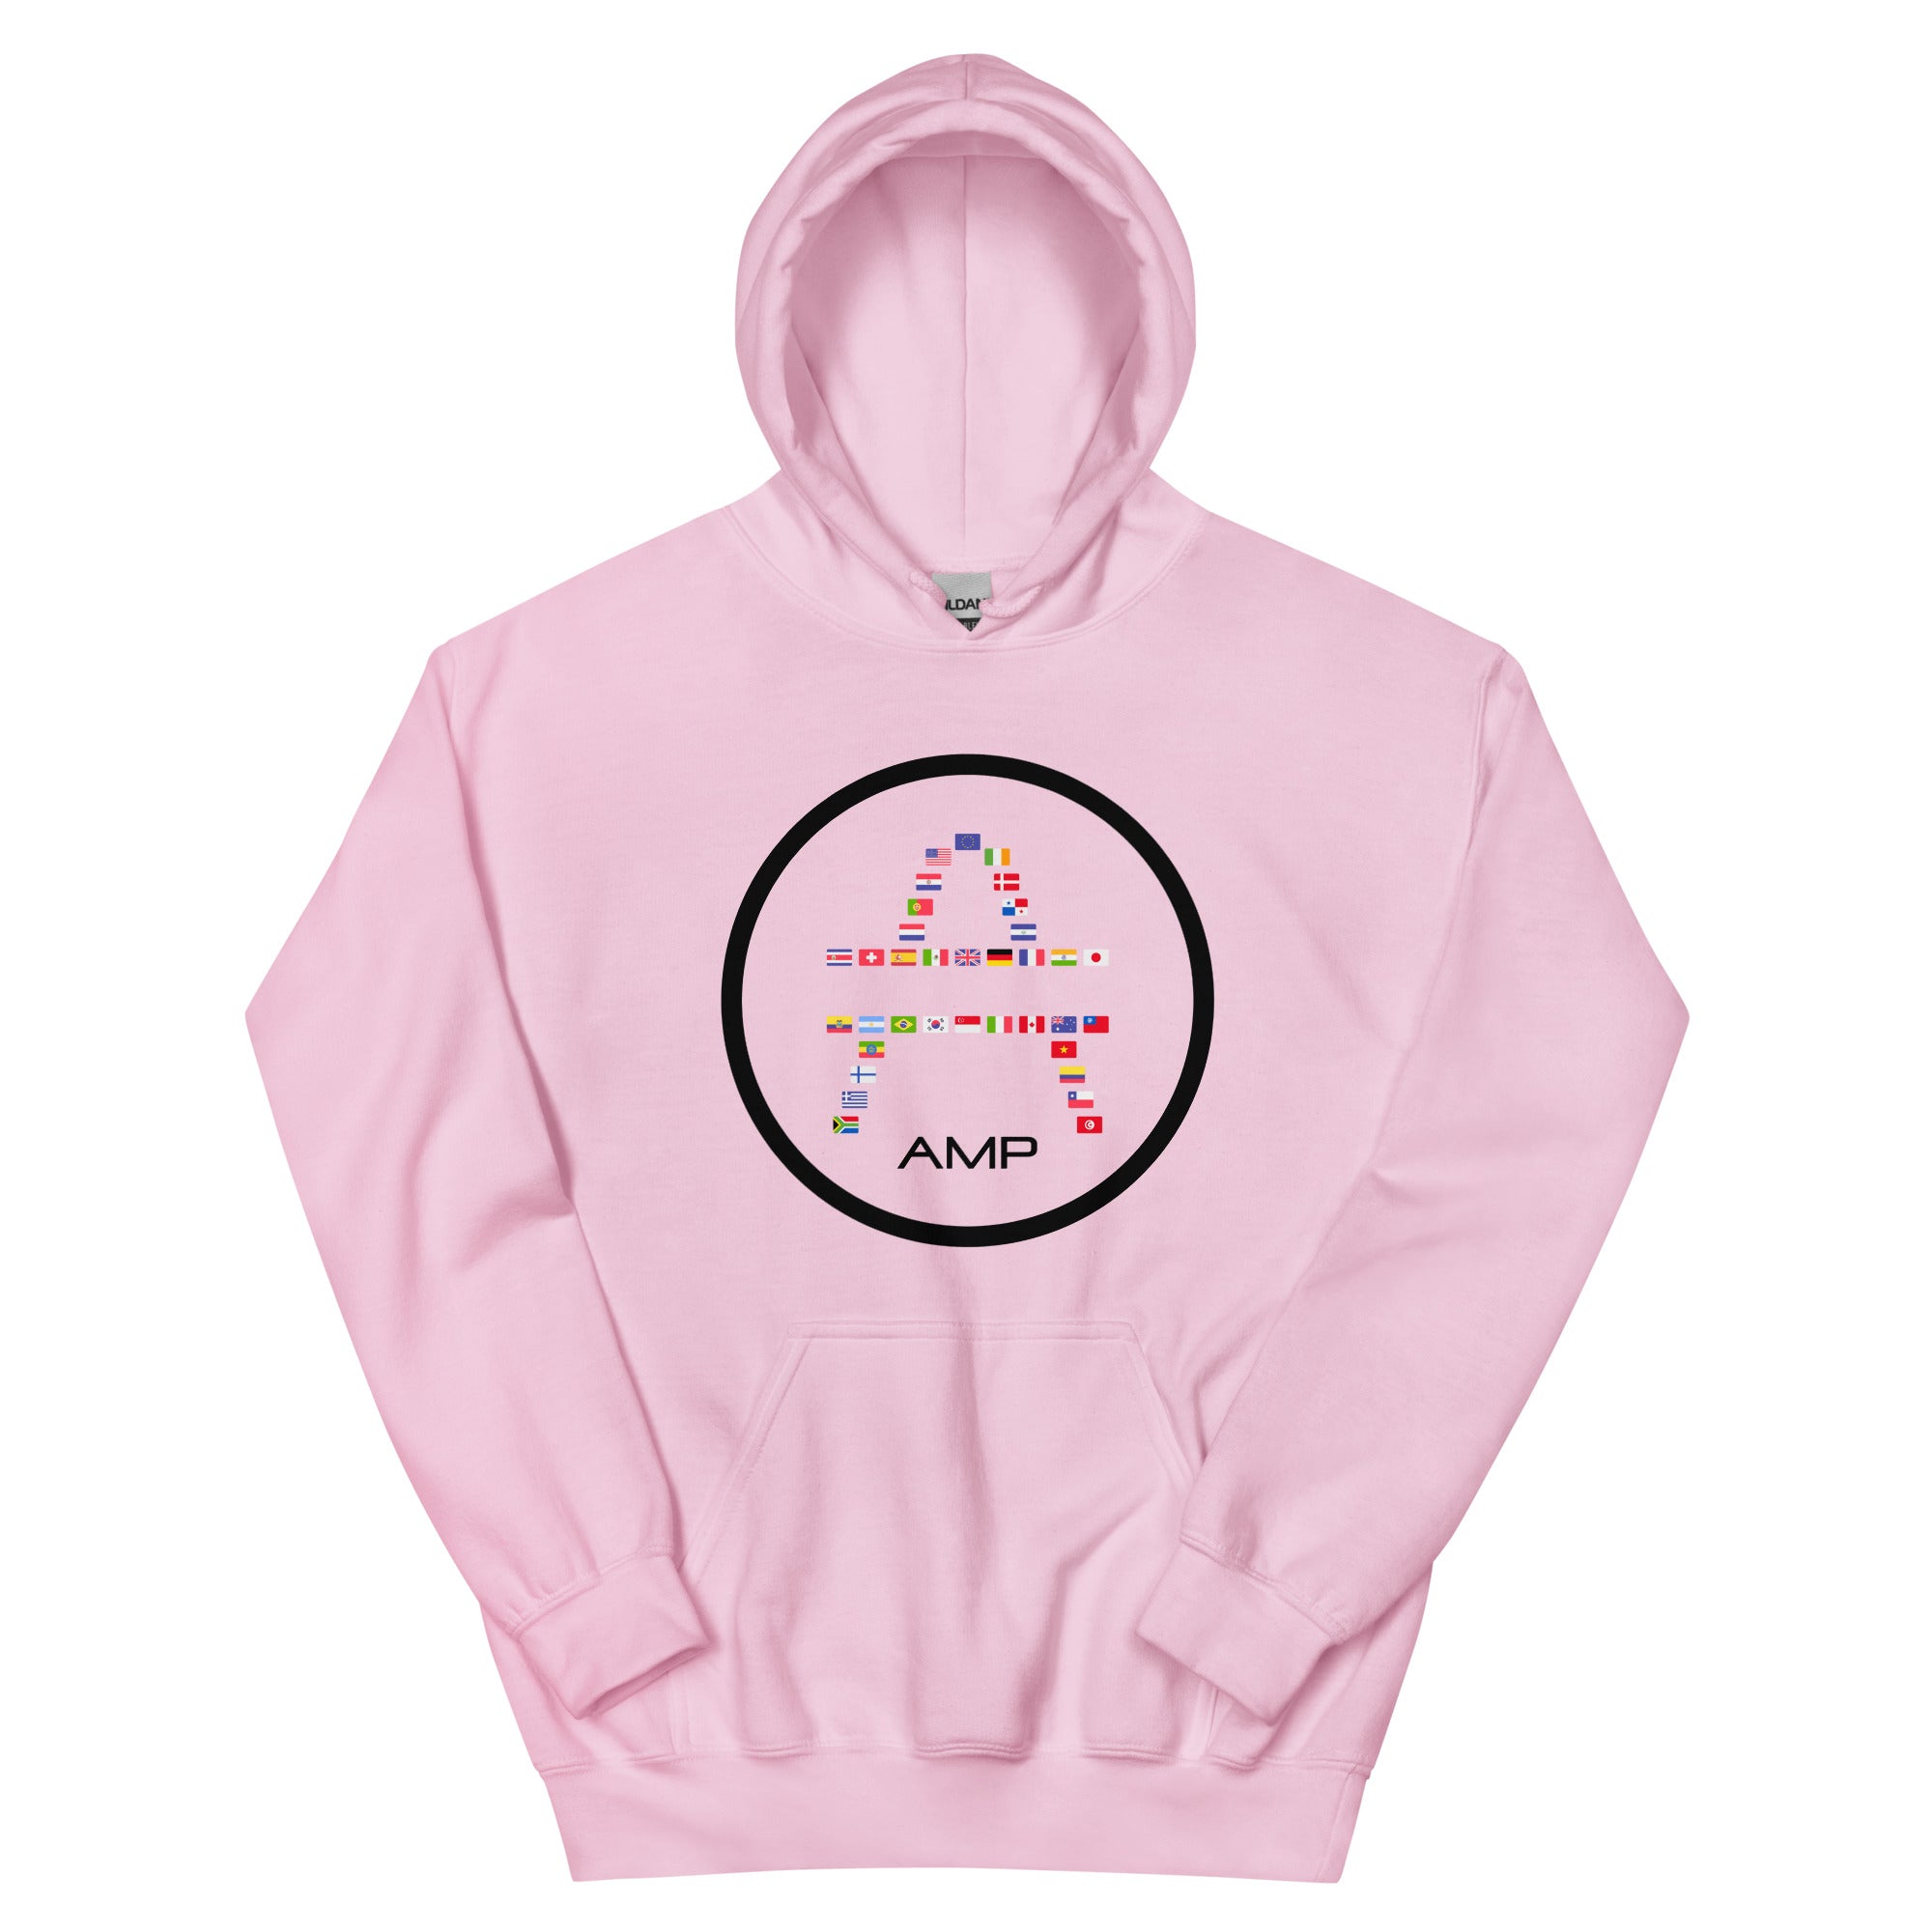 a AMP Swagg Global hoodie in light pink